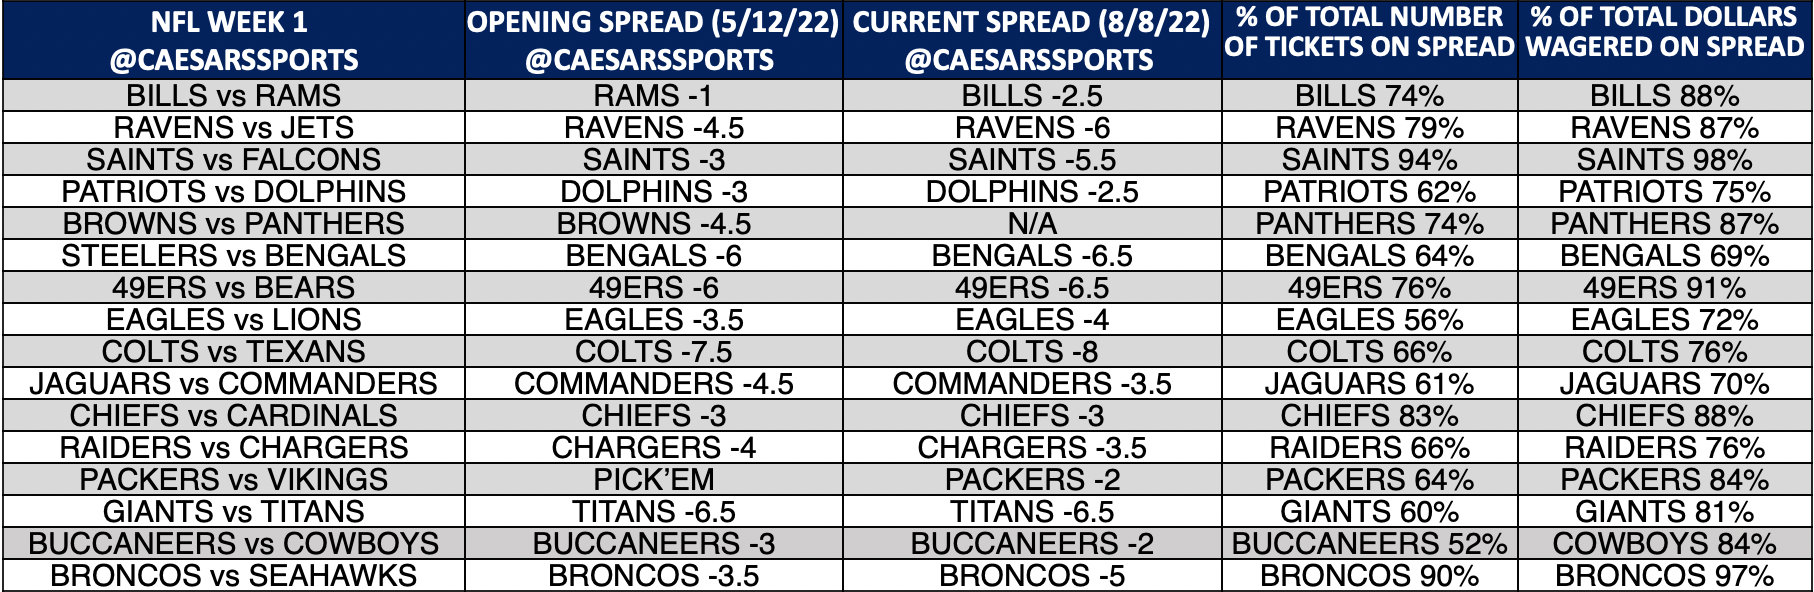 NFL Week 3 Odds & Betting Lines: Point Spreads, Moneylines, Totals